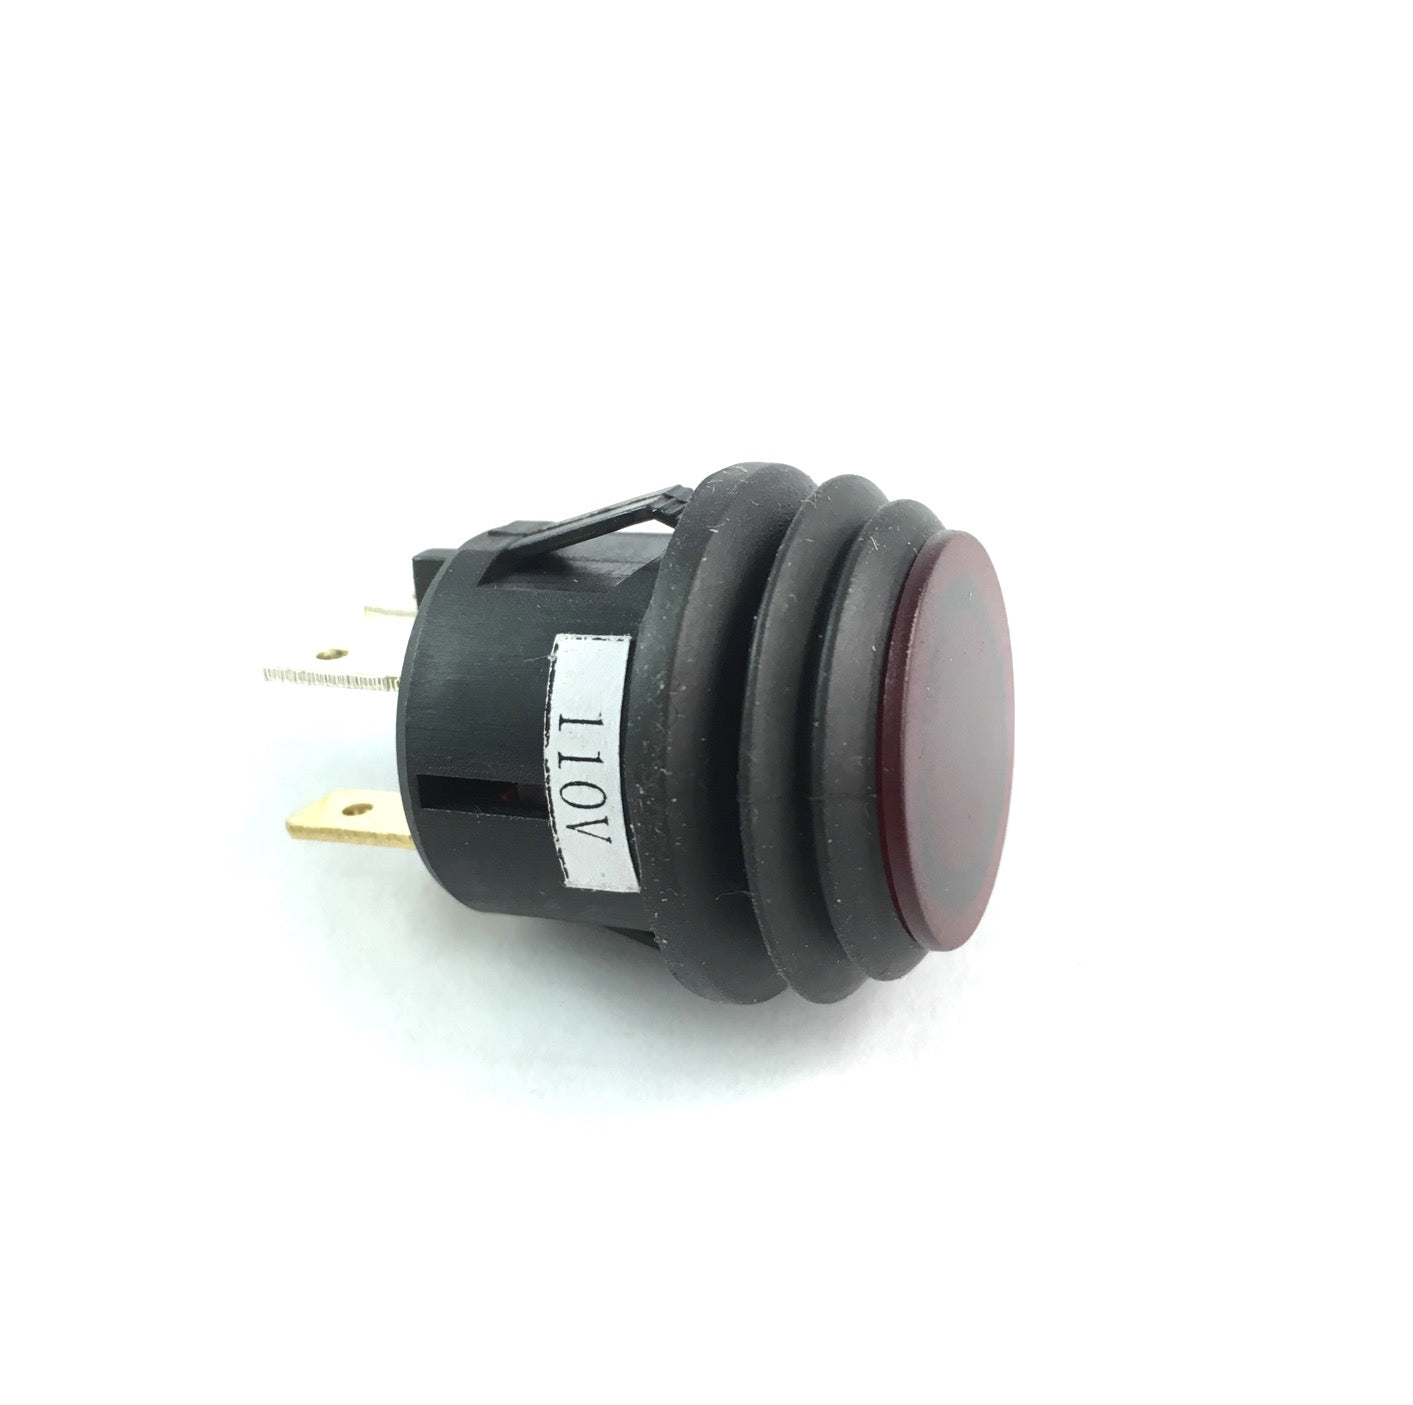 SPST On-Off Round Pushbutton Switch - 20A @ 120VAC